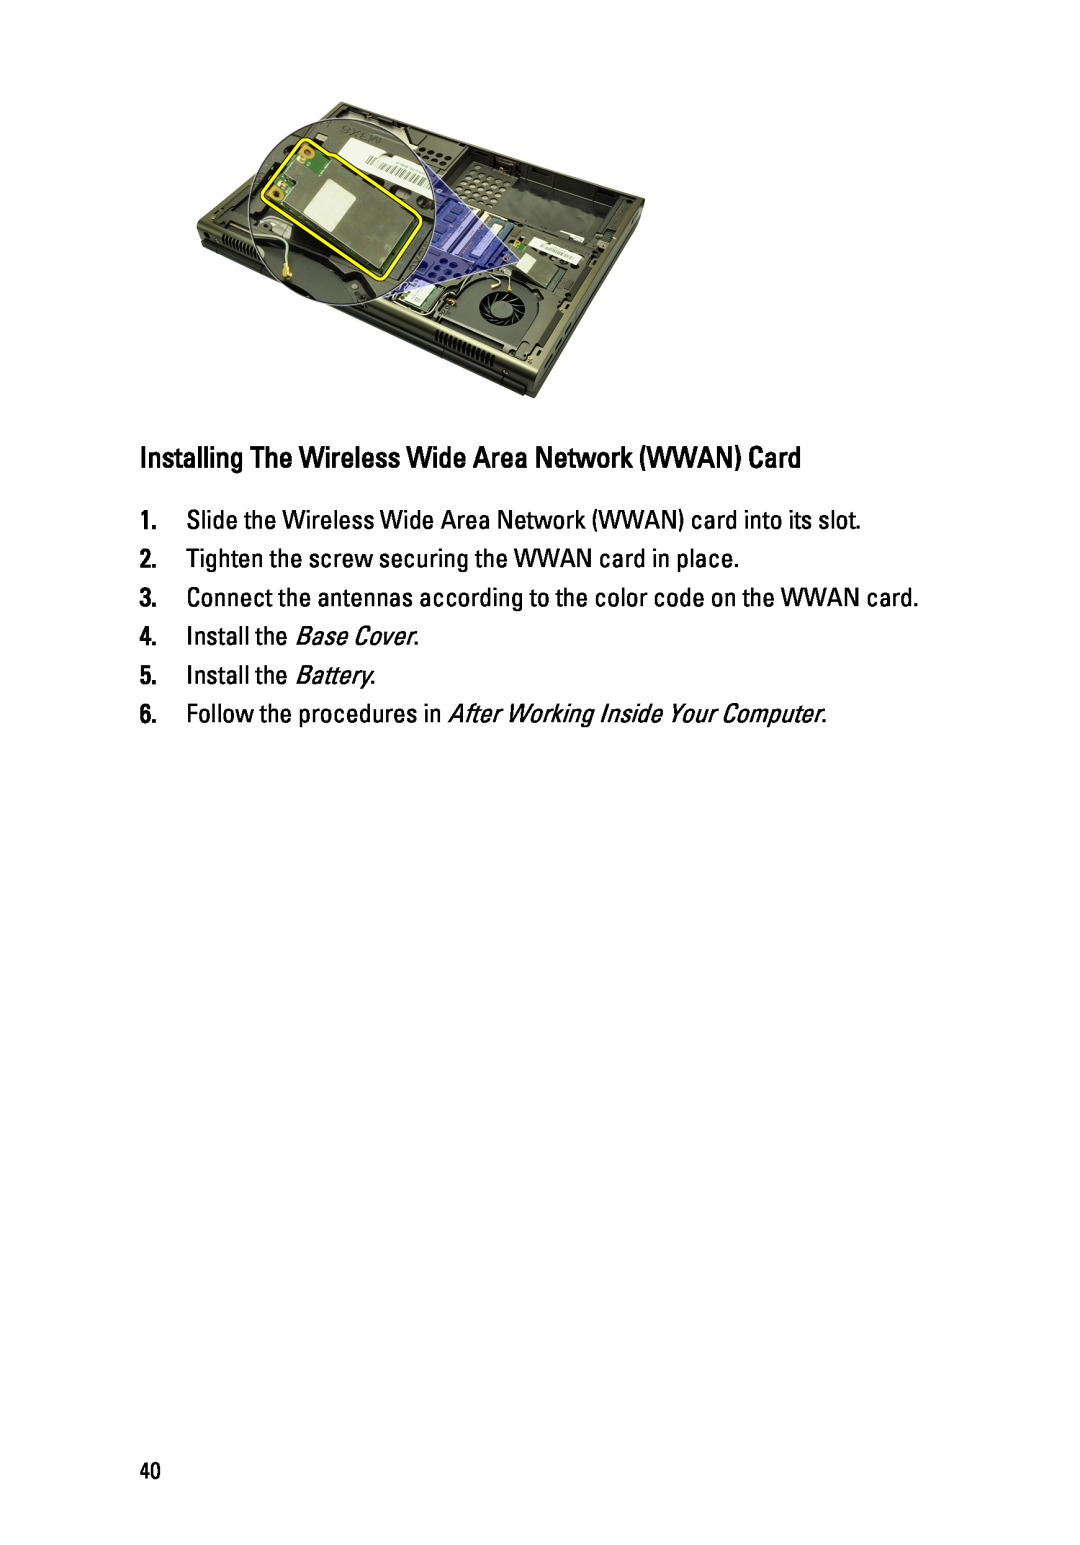 Dell M4600 Installing The Wireless Wide Area Network WWAN Card, Tighten the screw securing the WWAN card in place 